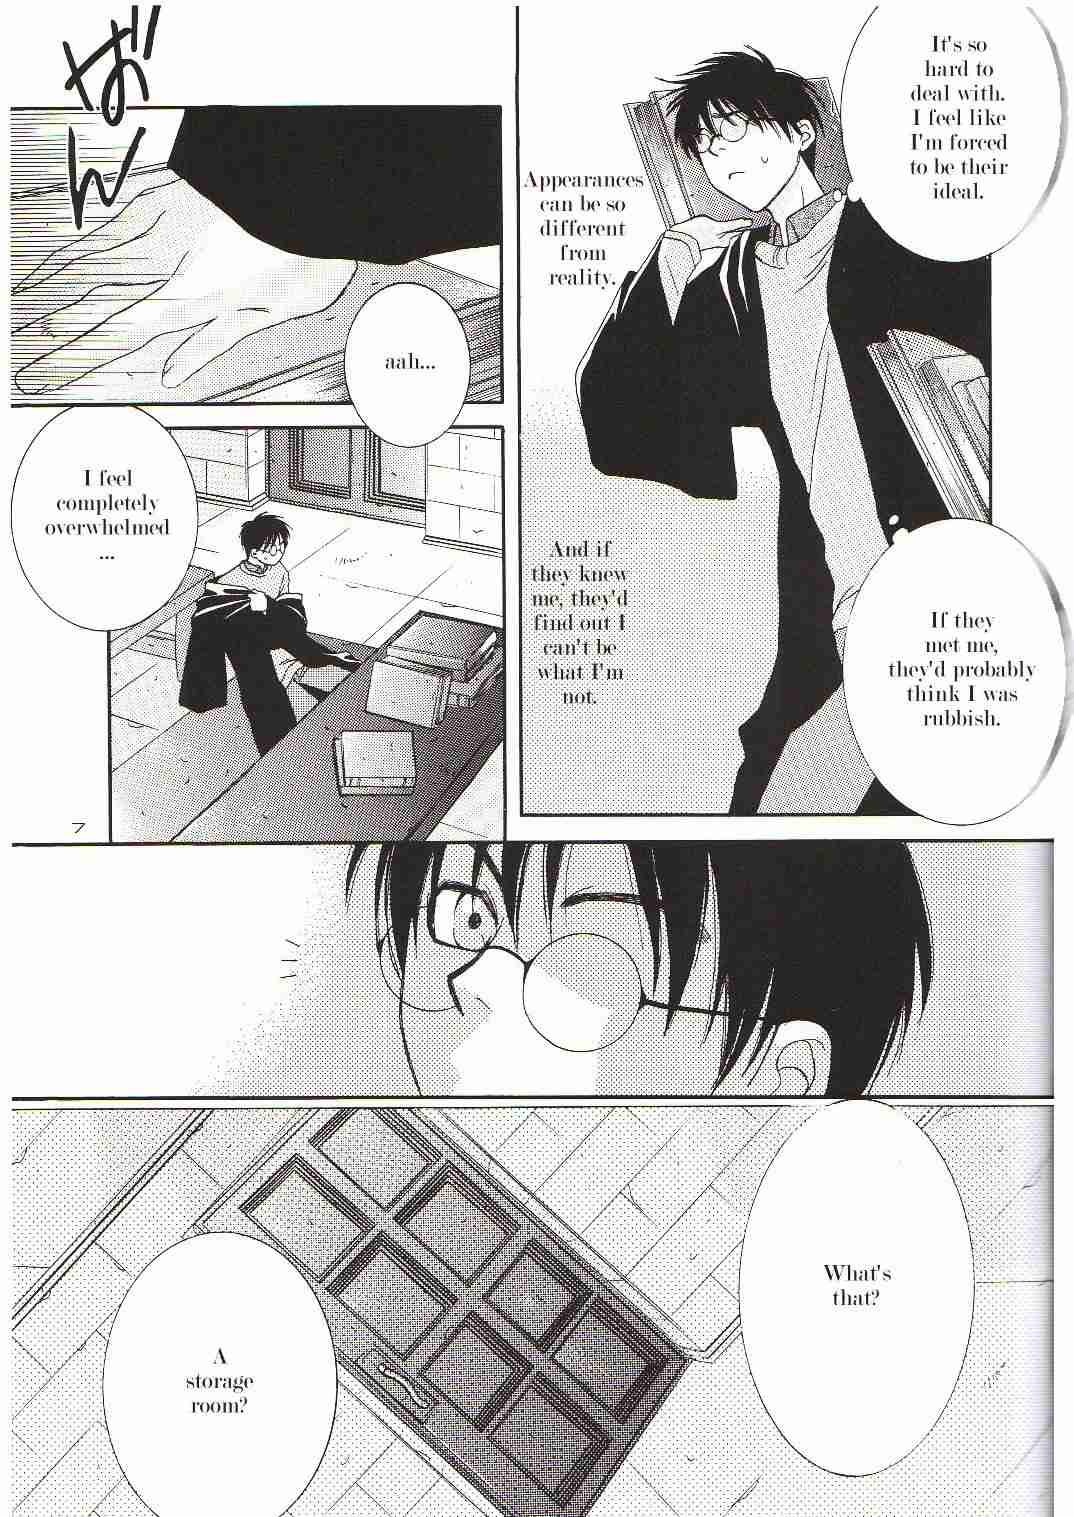 Harry Potter Day after day (Doujinshi) Oneshot